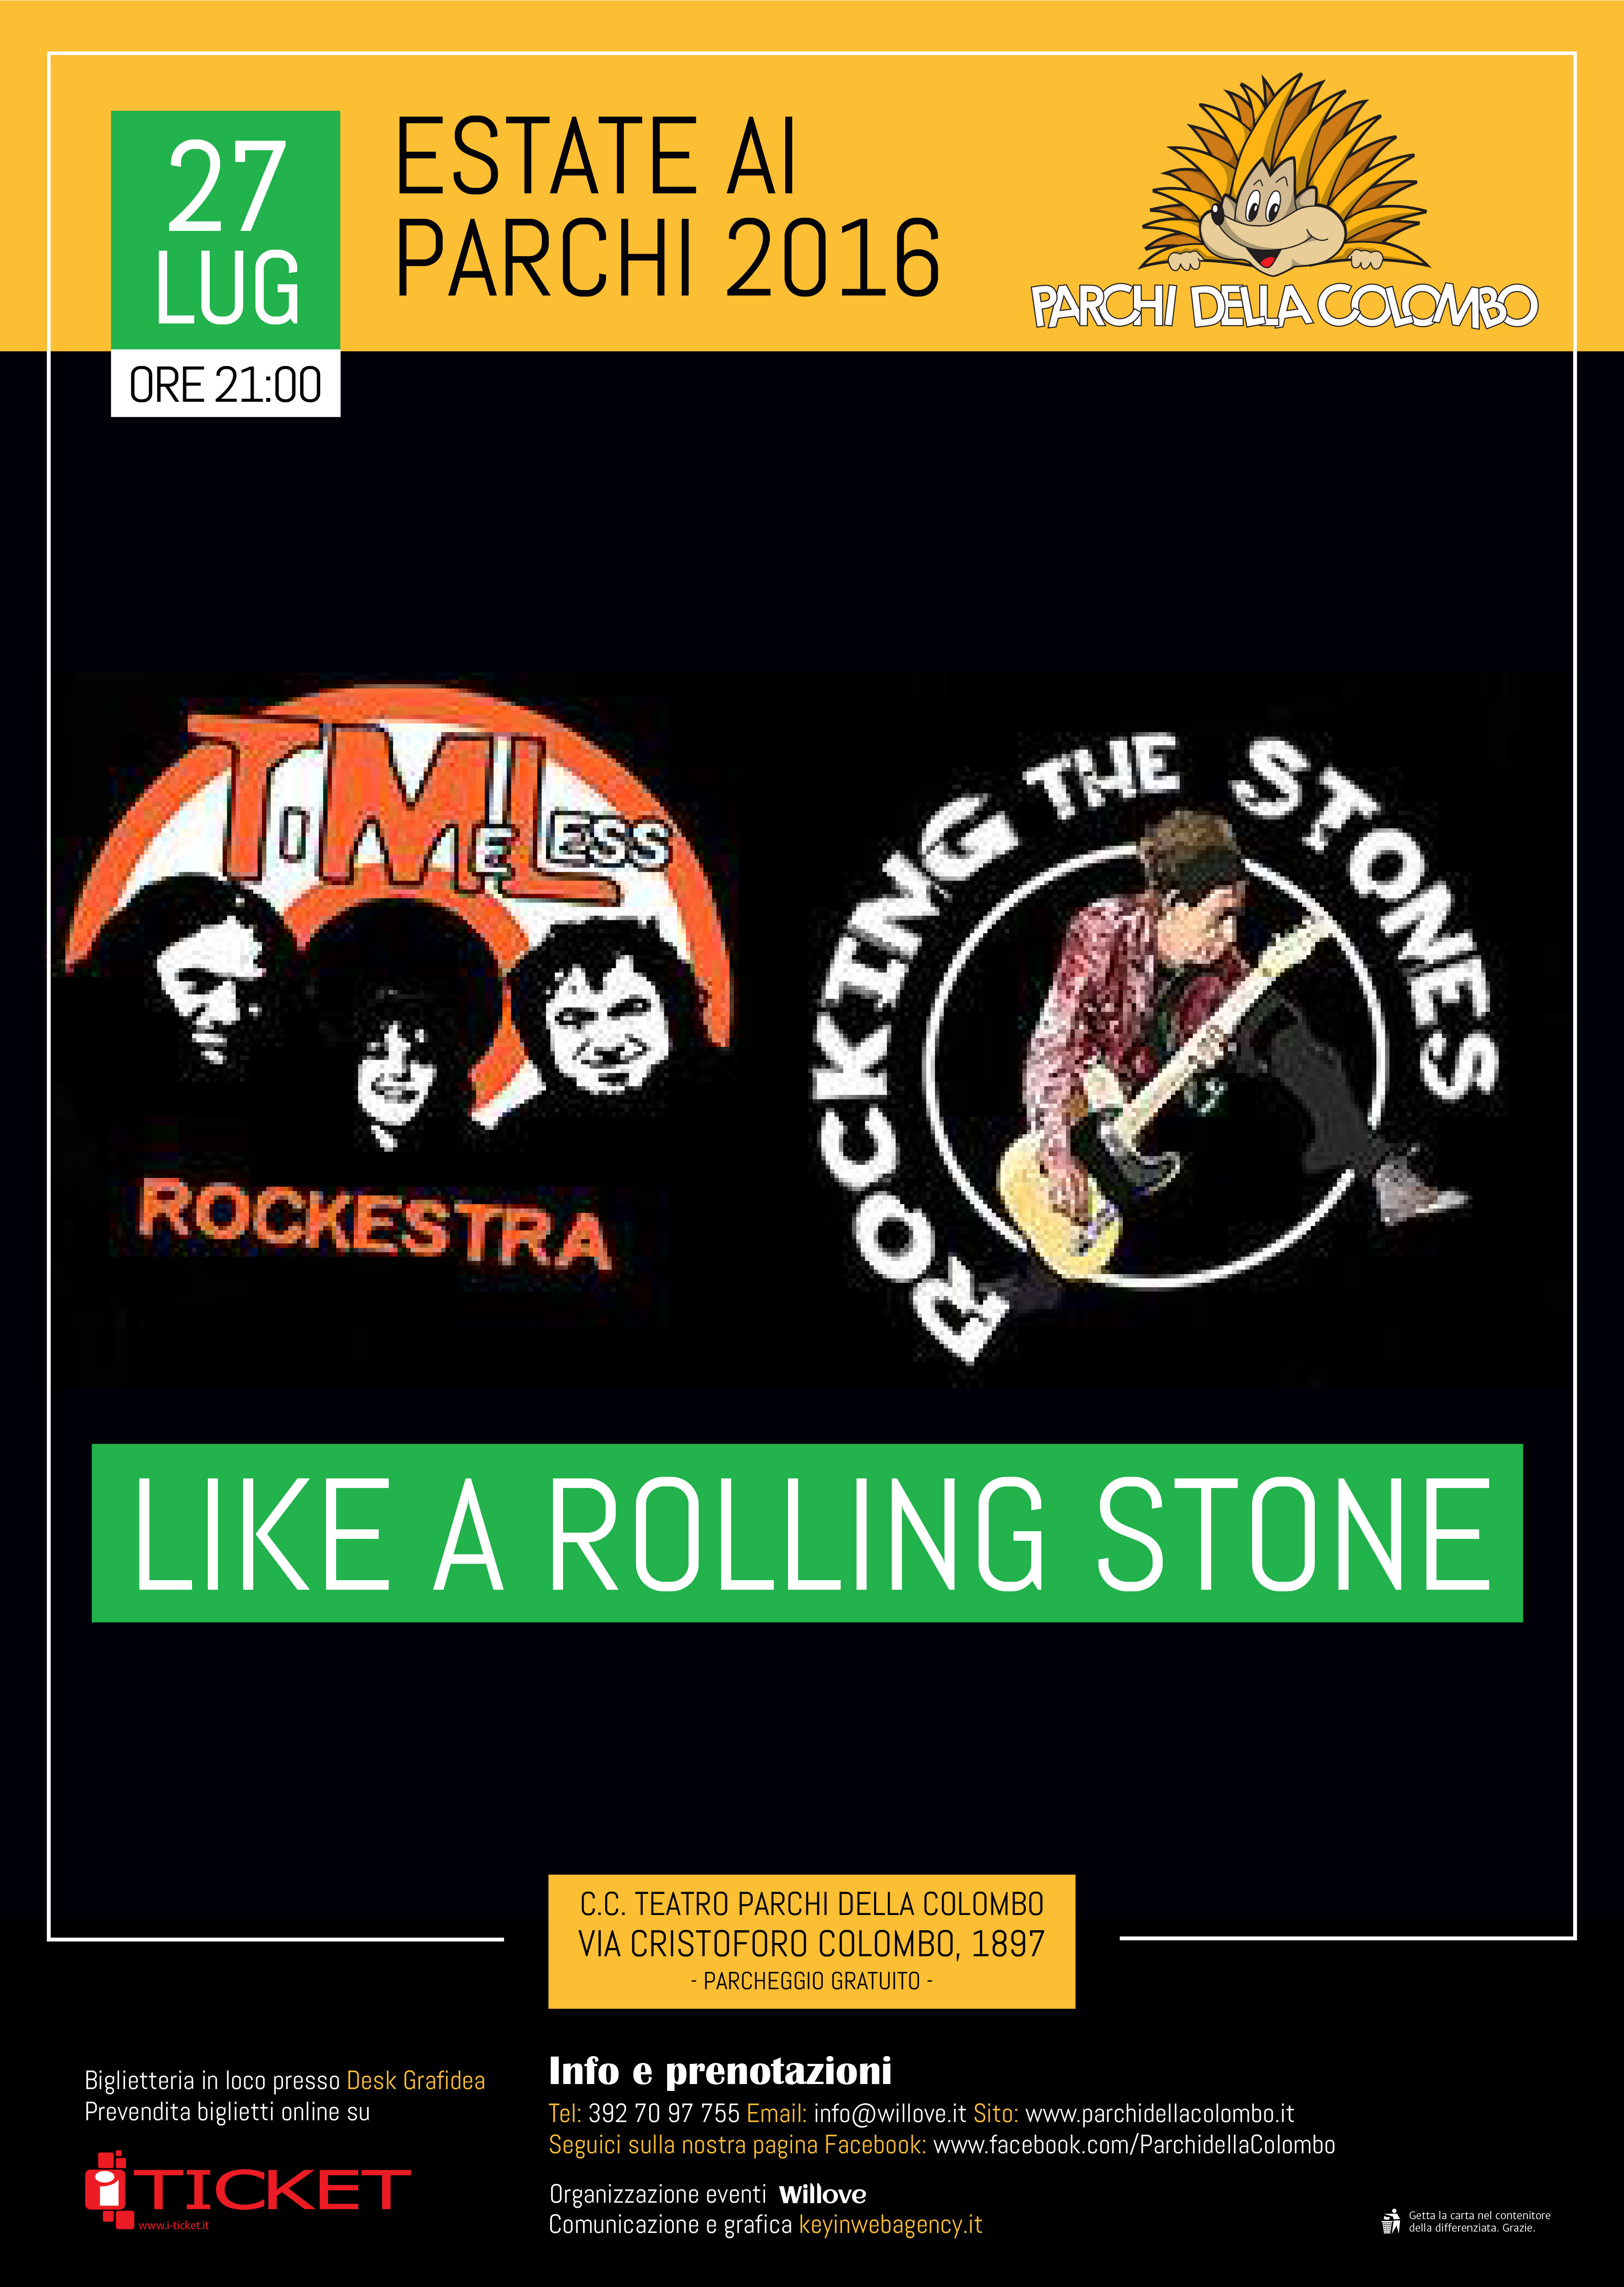 LIKE A ROLLING STONES